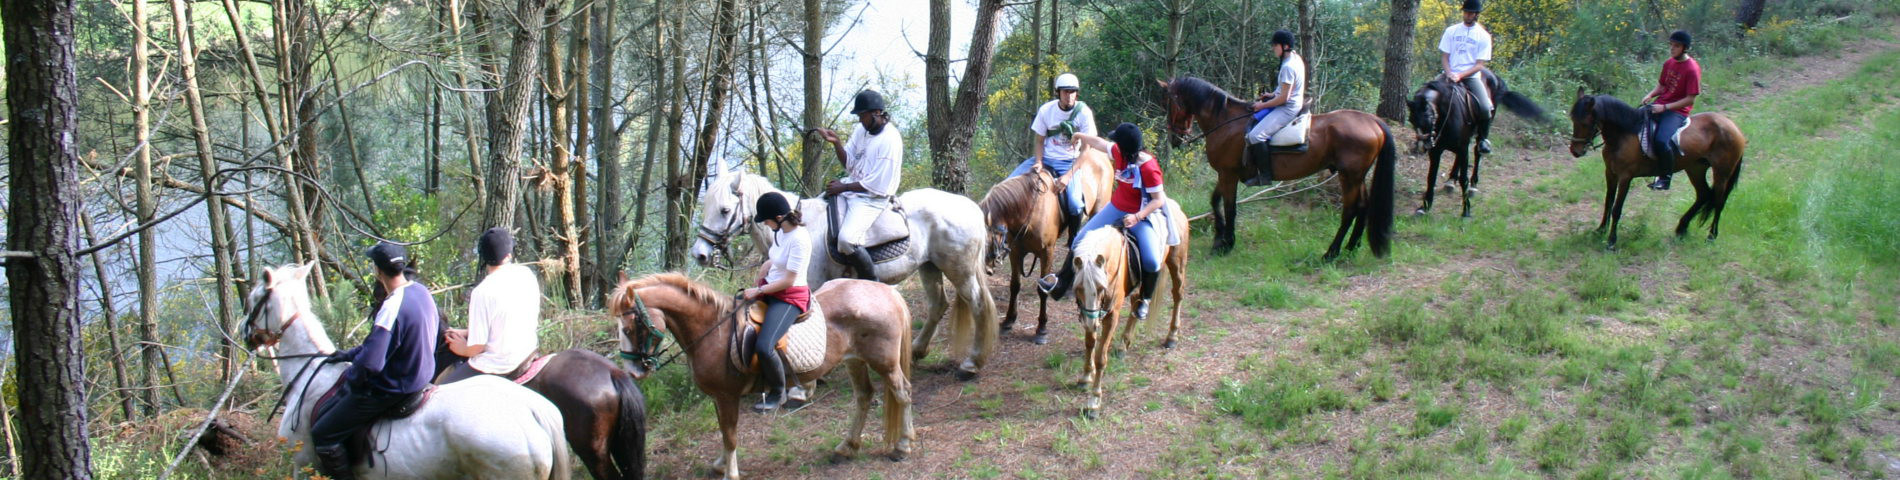 Horse riding, - If you like horses don´t miss it!